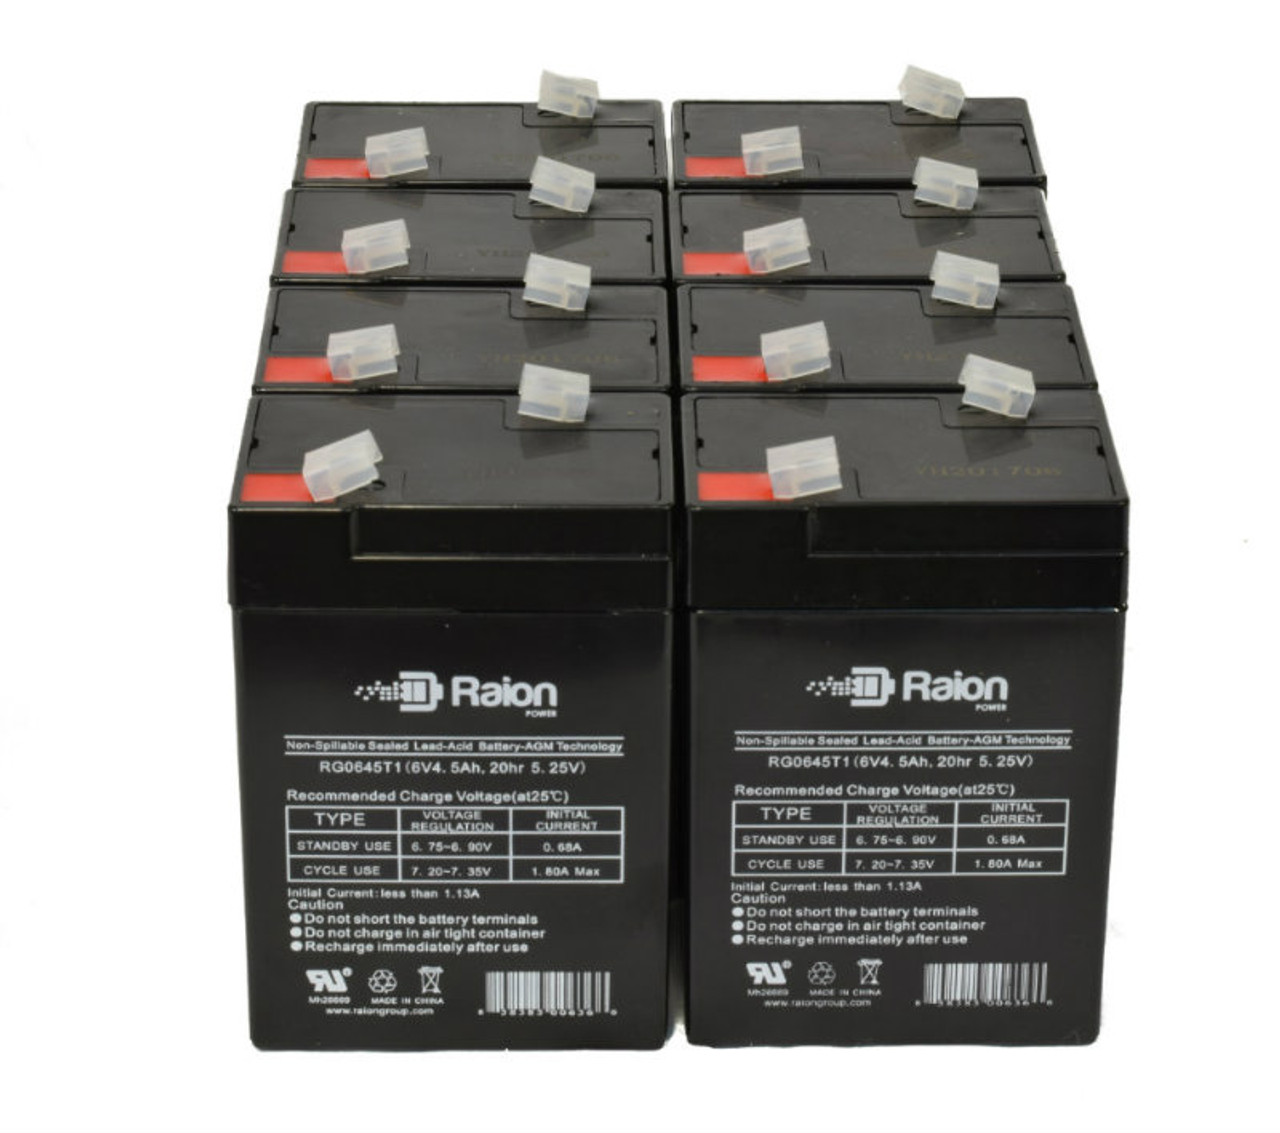 Raion Power 6 Volt 4.5Ah RG0645T1 Replacement Battery for Blossom BT4.5-6 - 8 Pack